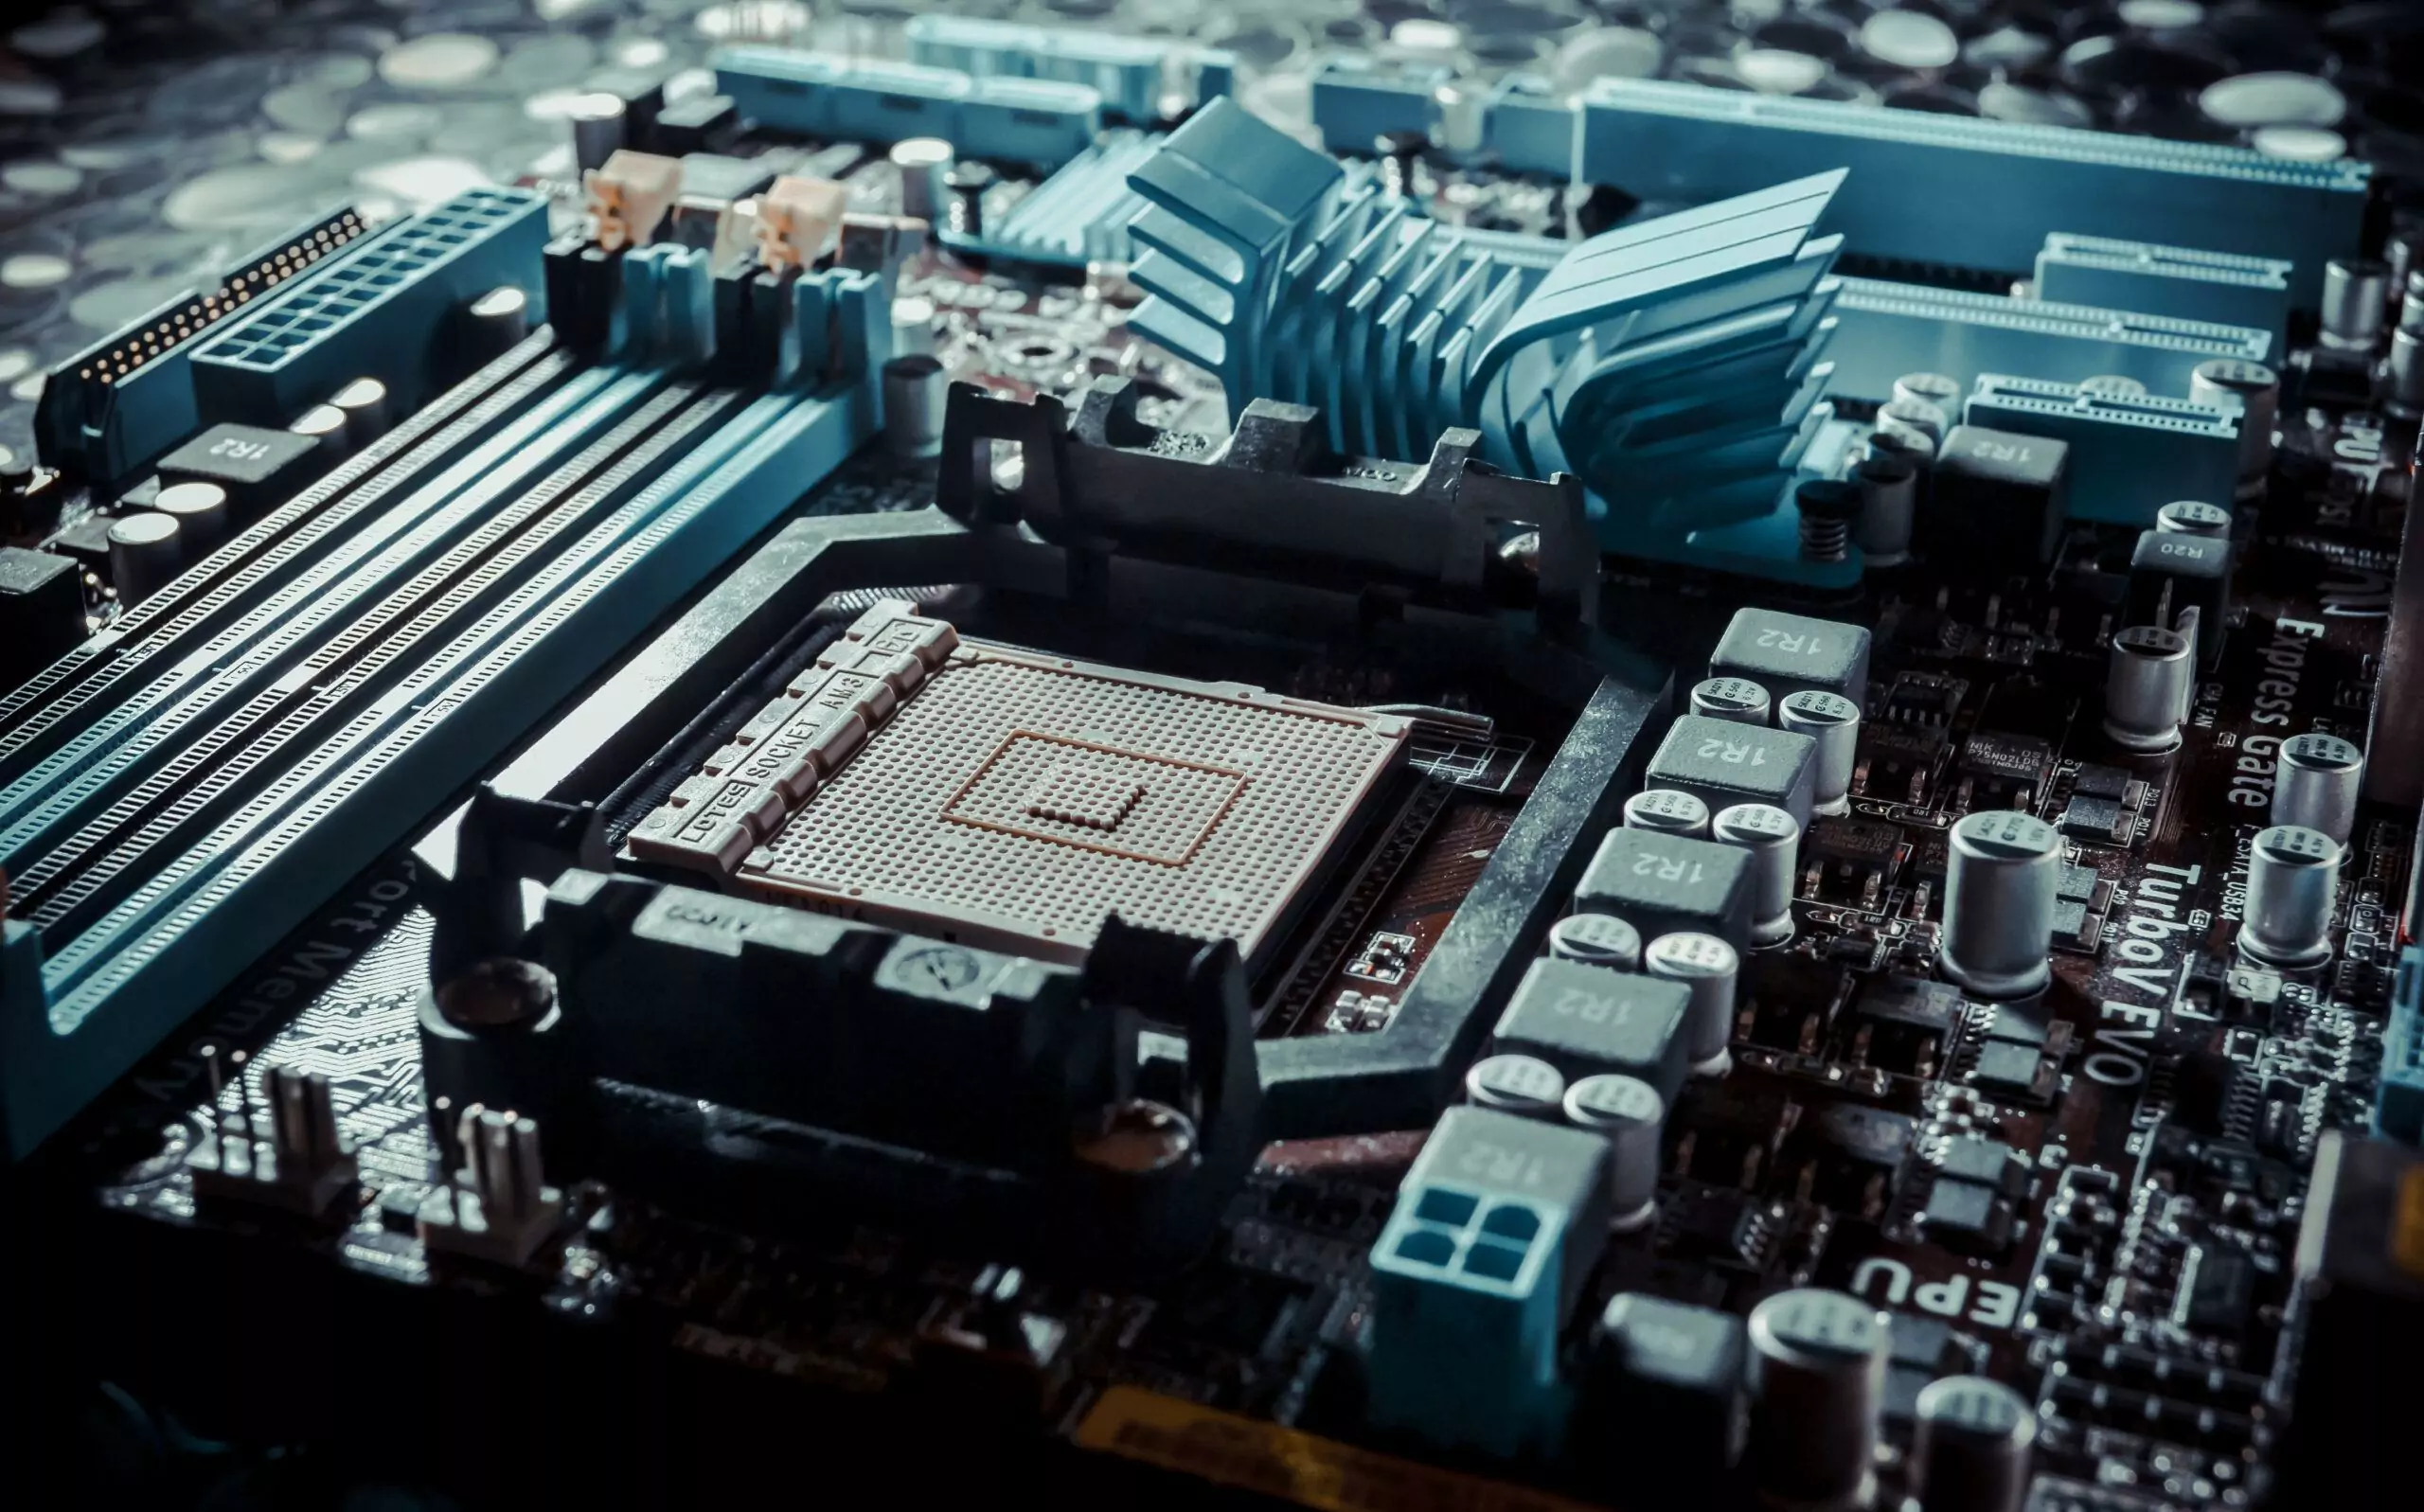 Motherboard on a table close up